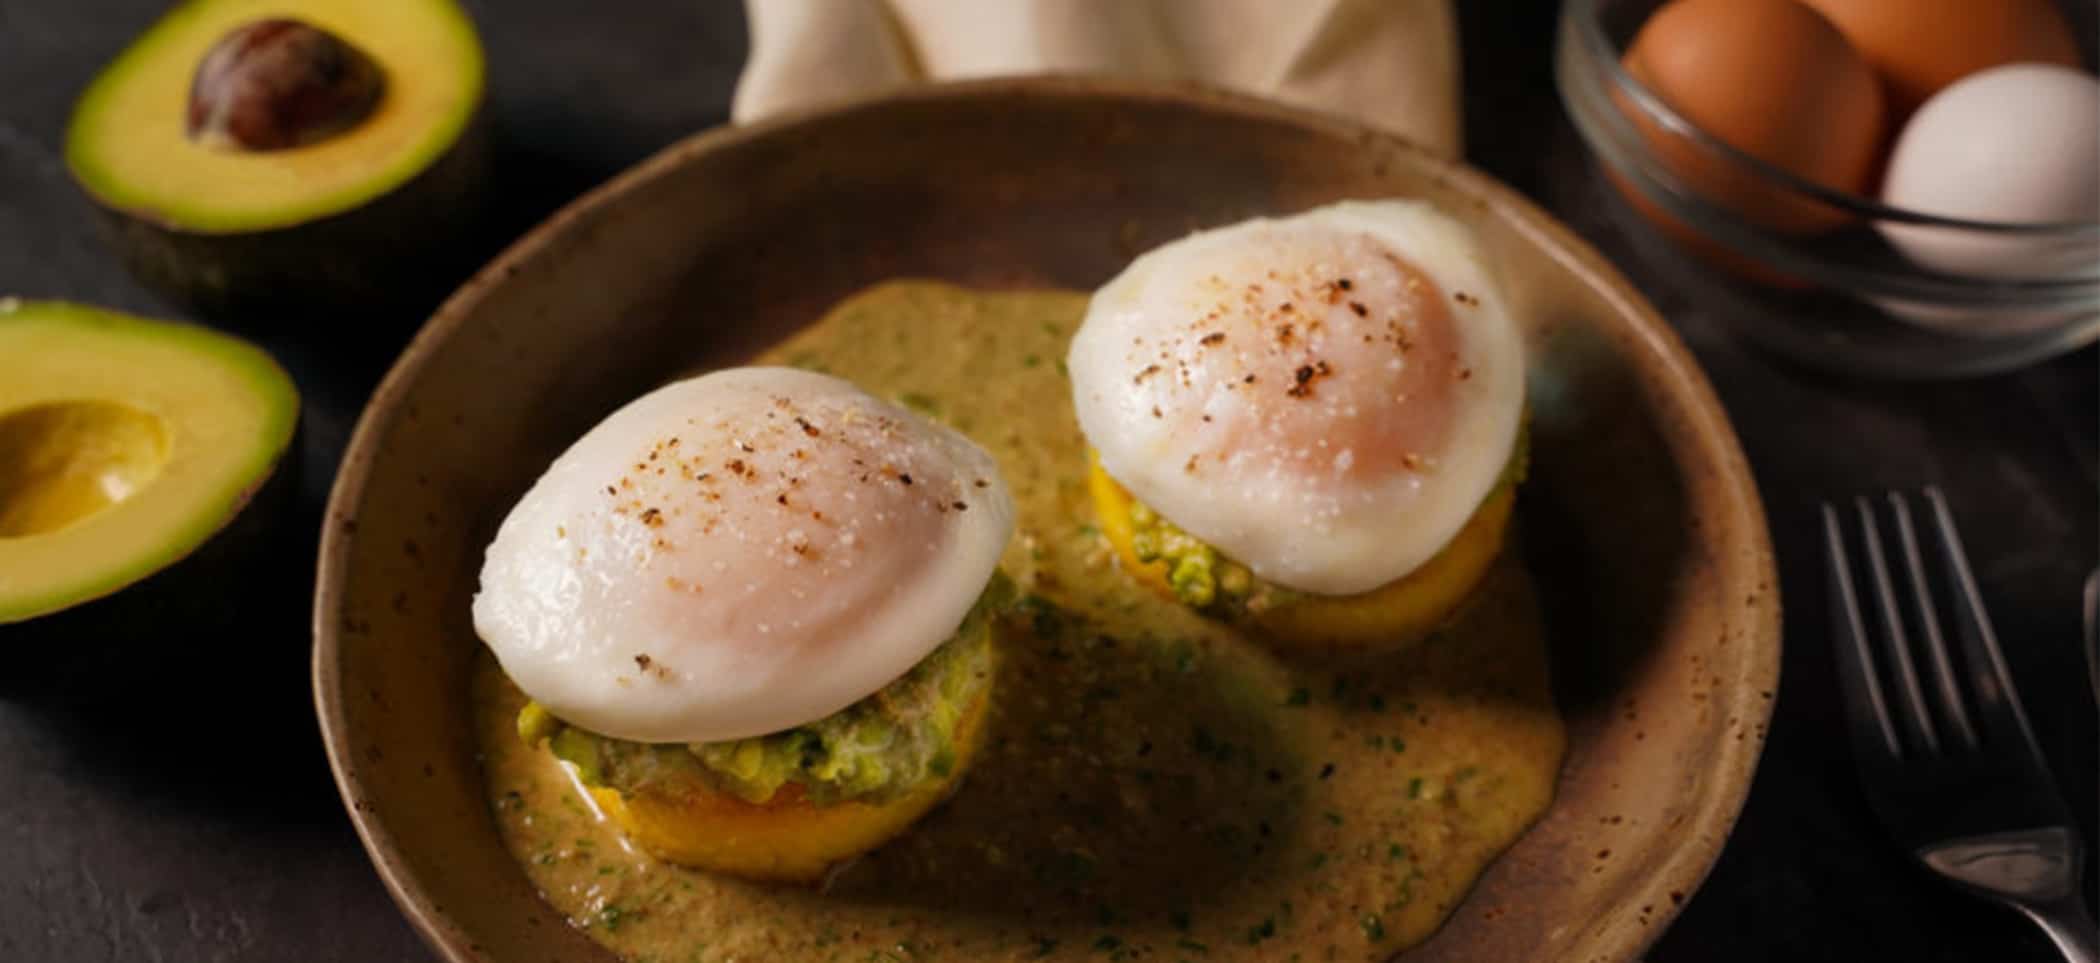 Polenta Cakes with Poached Eggs, Guacamole and Pumpkin Seed Salsa